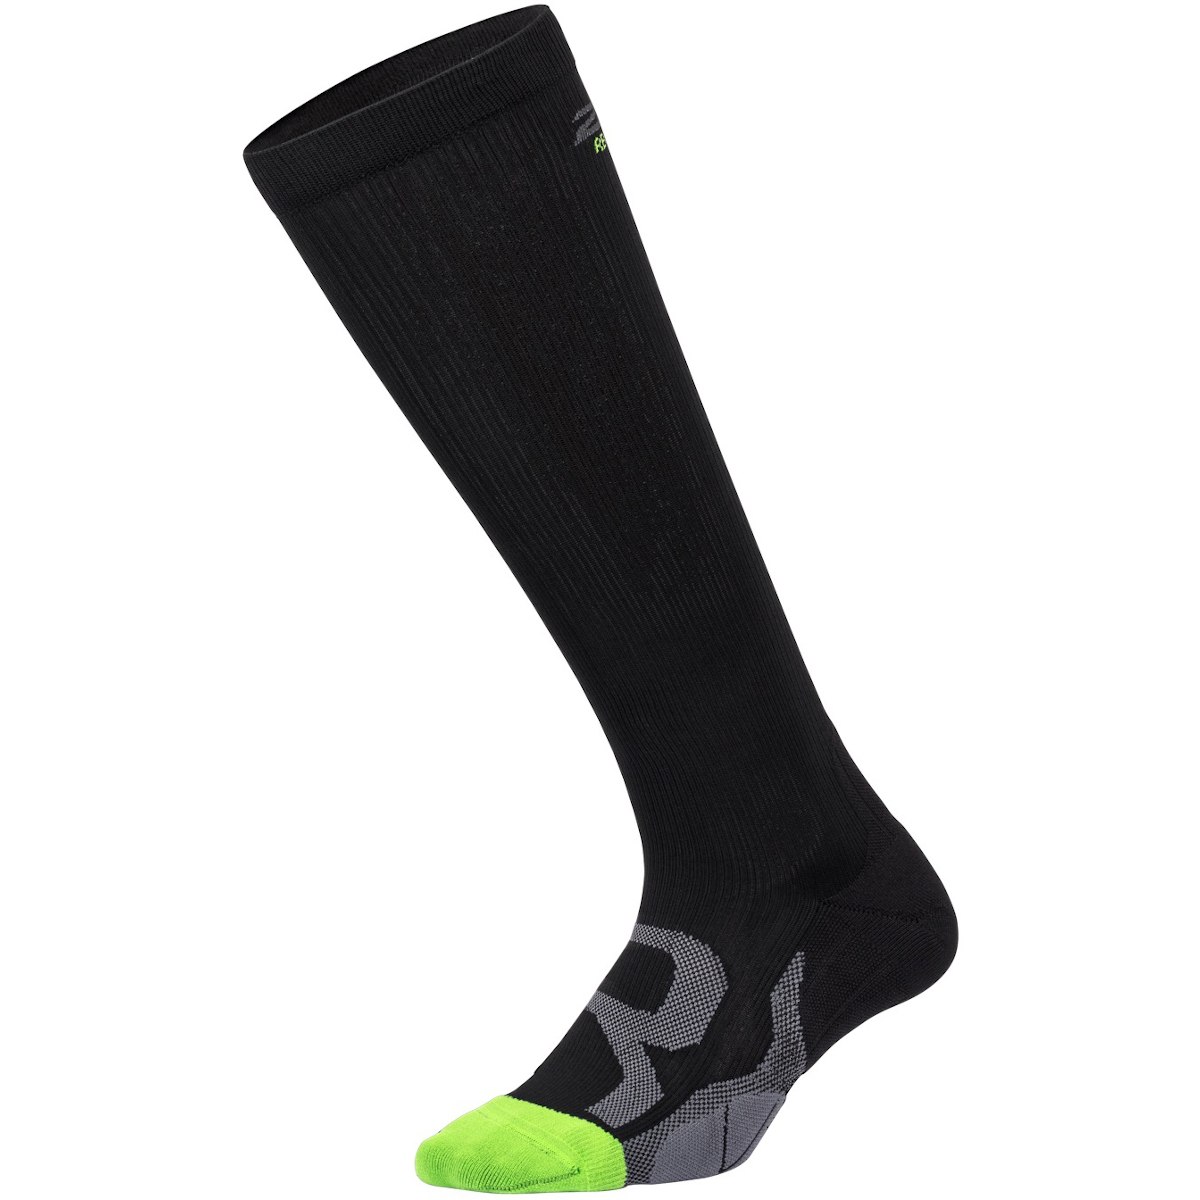 Image of 2XU Compression Socks for Recovery - narrow - black